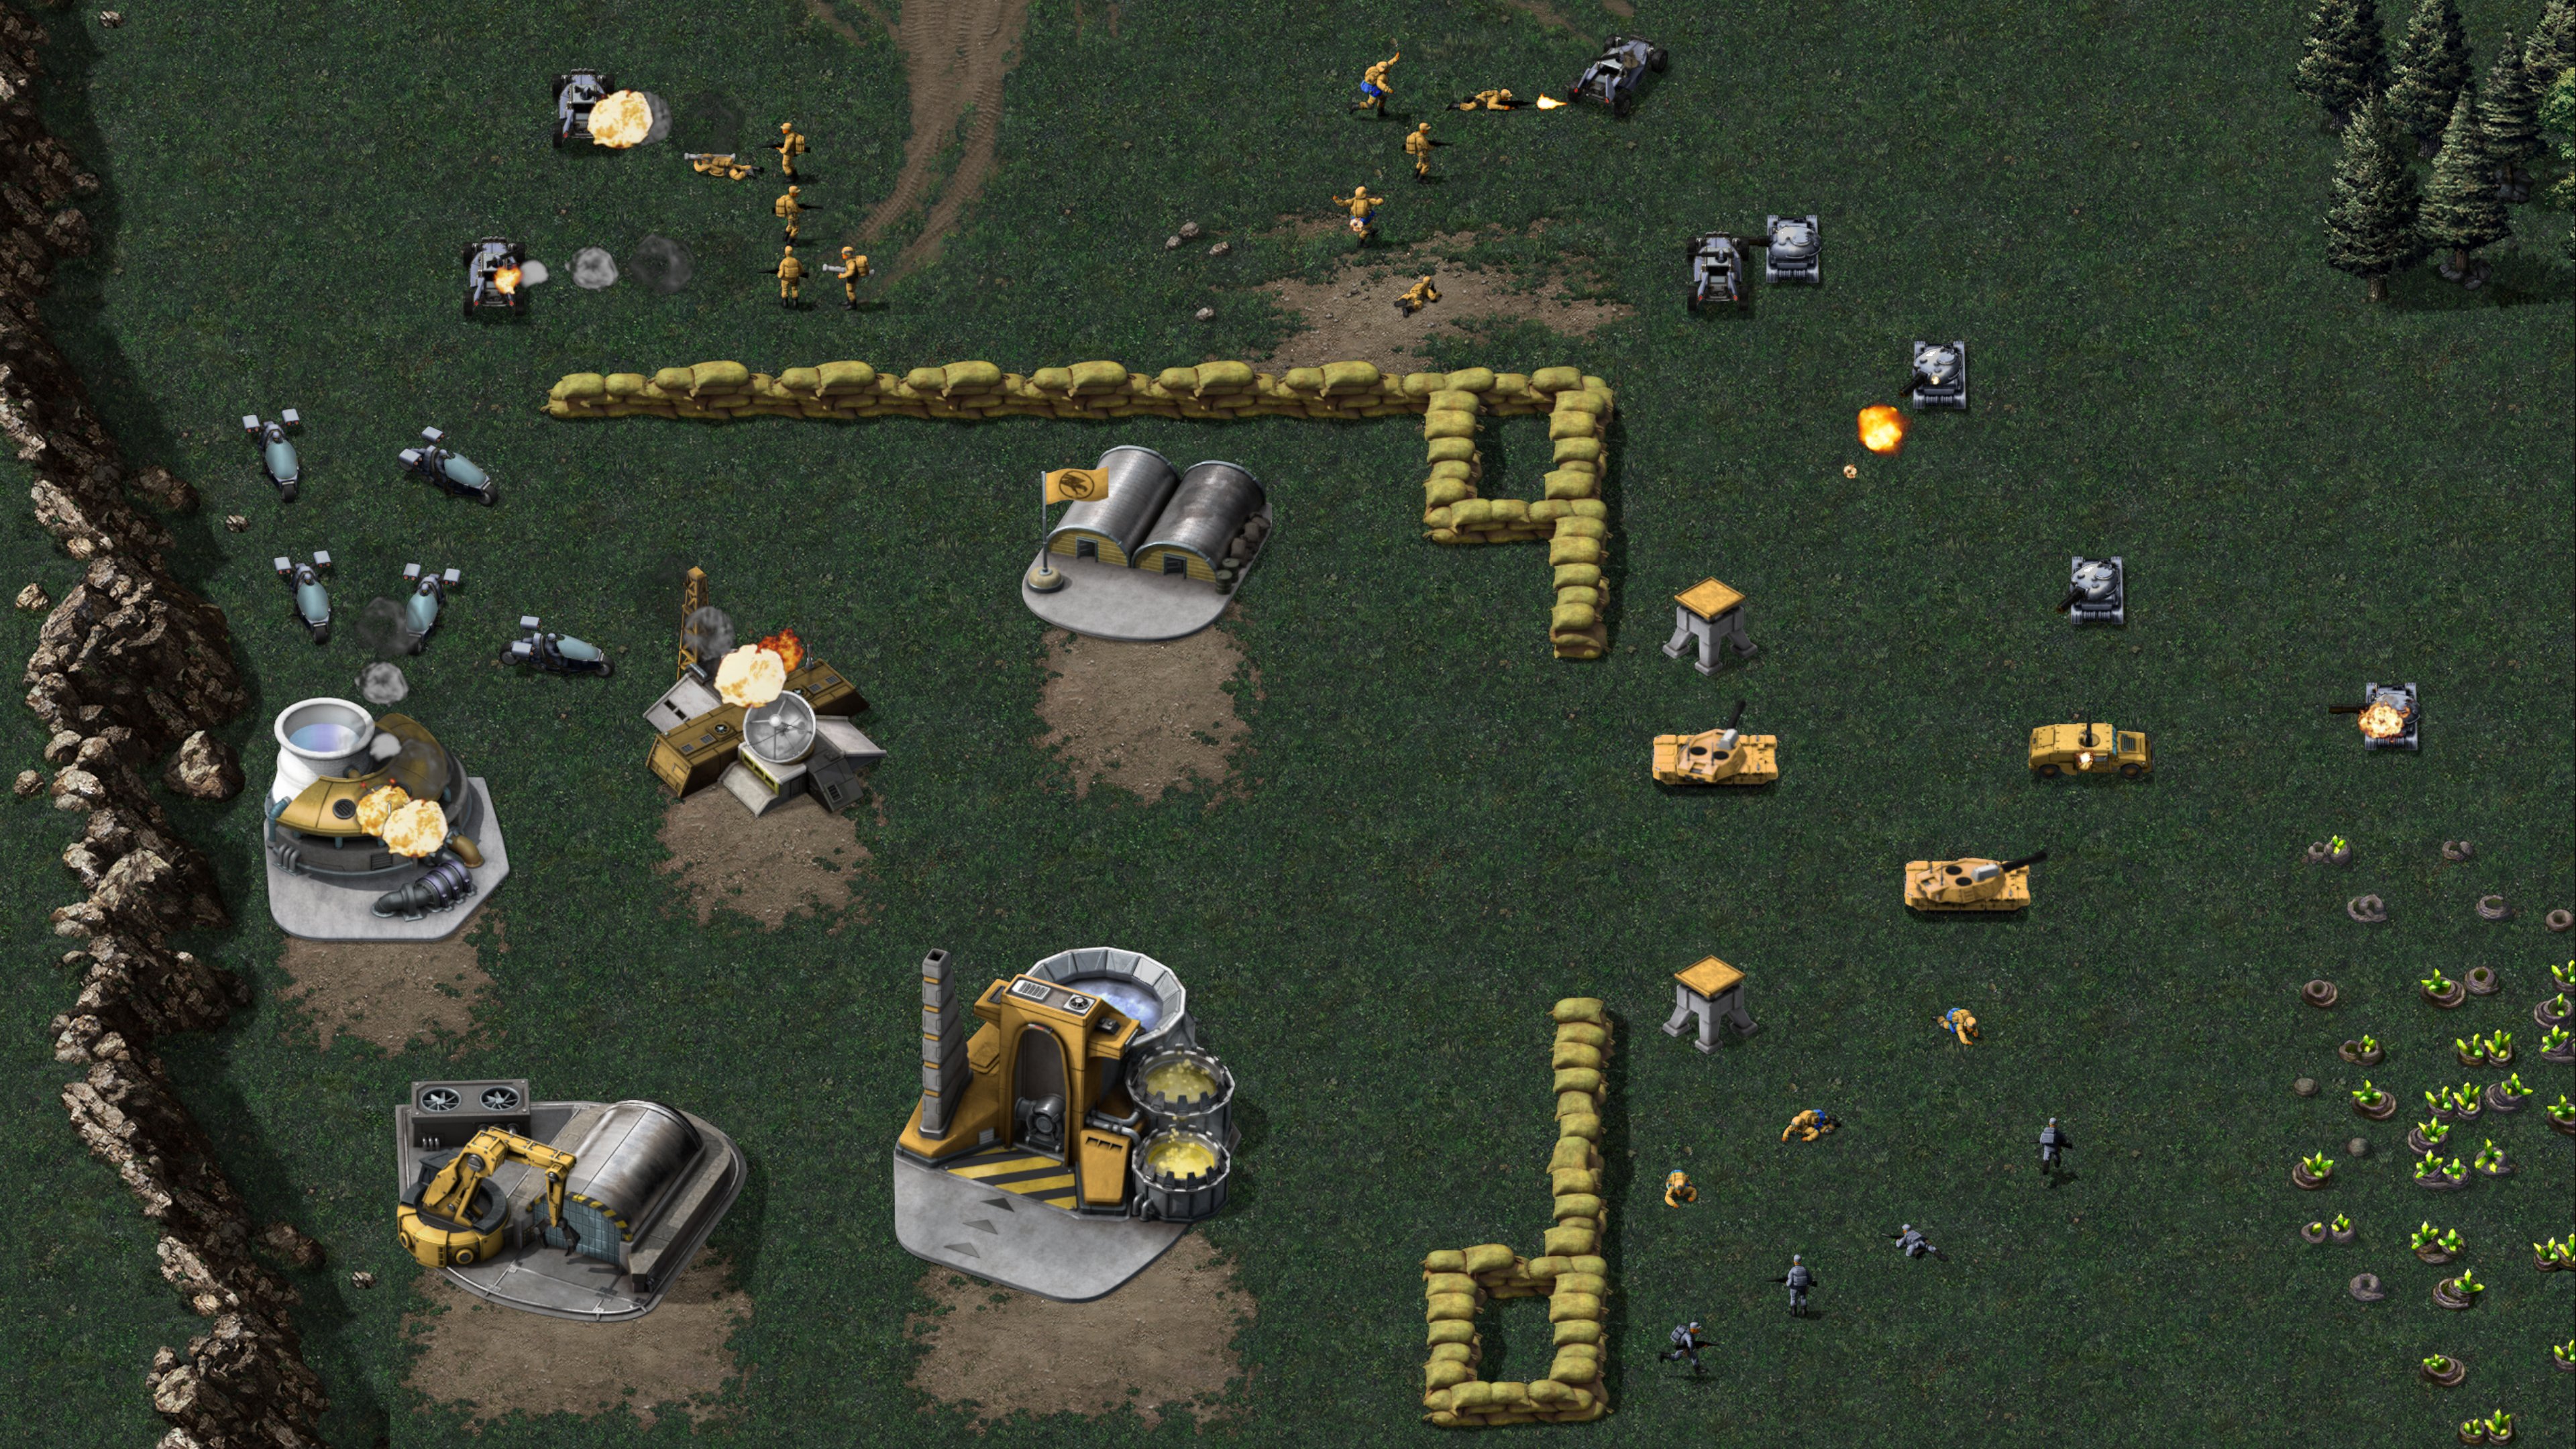 Command and conquer remastered. Command & Conquer Remastered collection. Command & Conquer (игра, 1995). Command and Conquer 1995 Remaster.